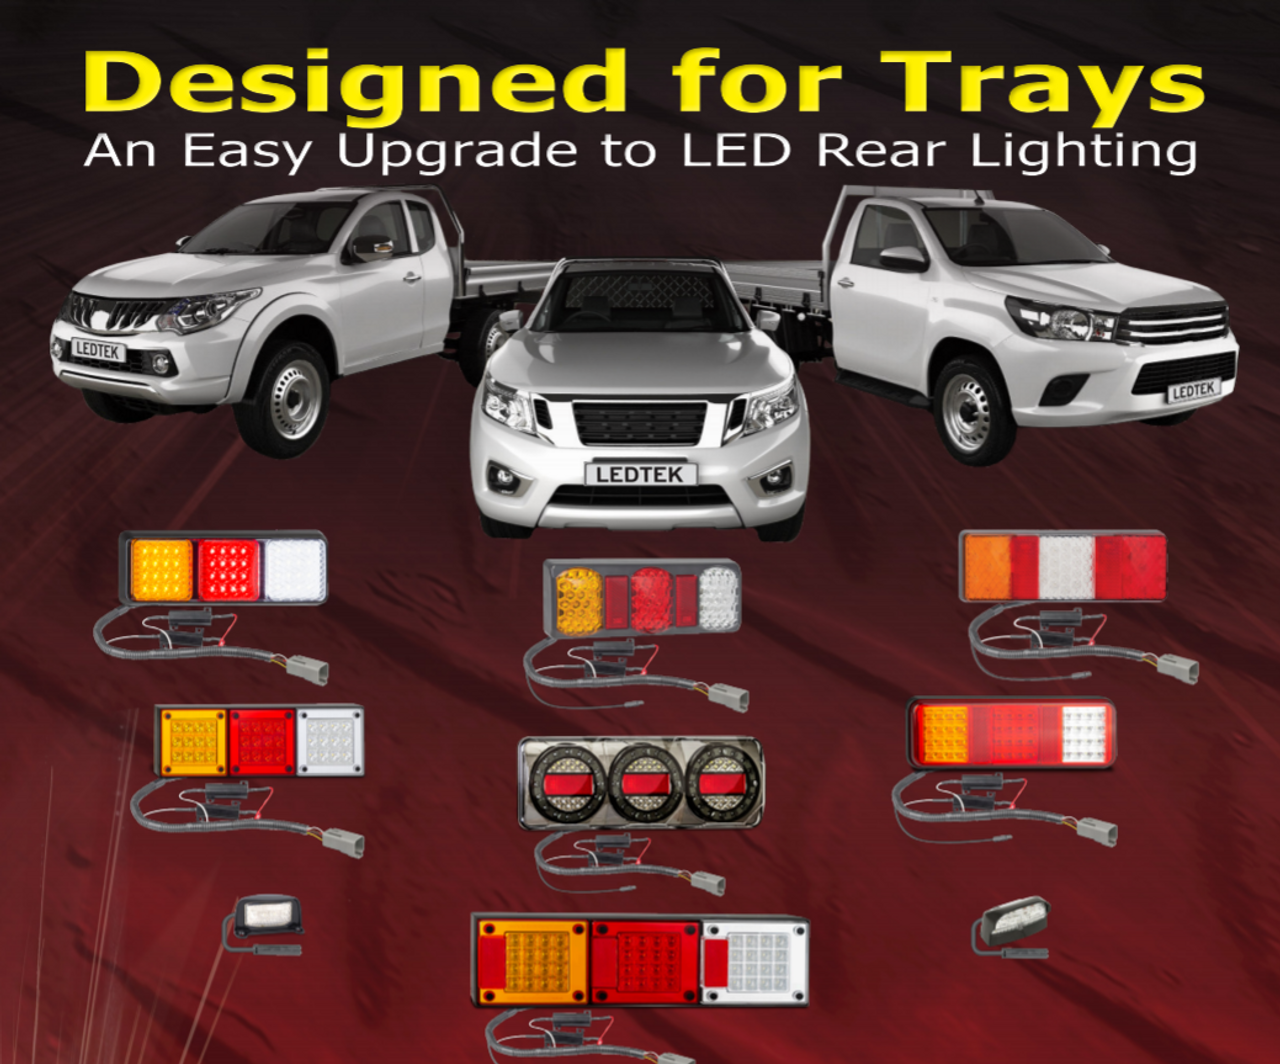 460ARWM2LR12/450+PATCHL-CRUISER - Land Cruiser LED Patch Cable System. Plug and Play. LED Upgrade. Designed for Trays. 460 Series Light. Stop, Tail, Indicator and Reverse. 12v Only. Lamp with Conversion Cable. Application to Suit Toyota Land Cruiser. Autolamp. Ultimate LED. 